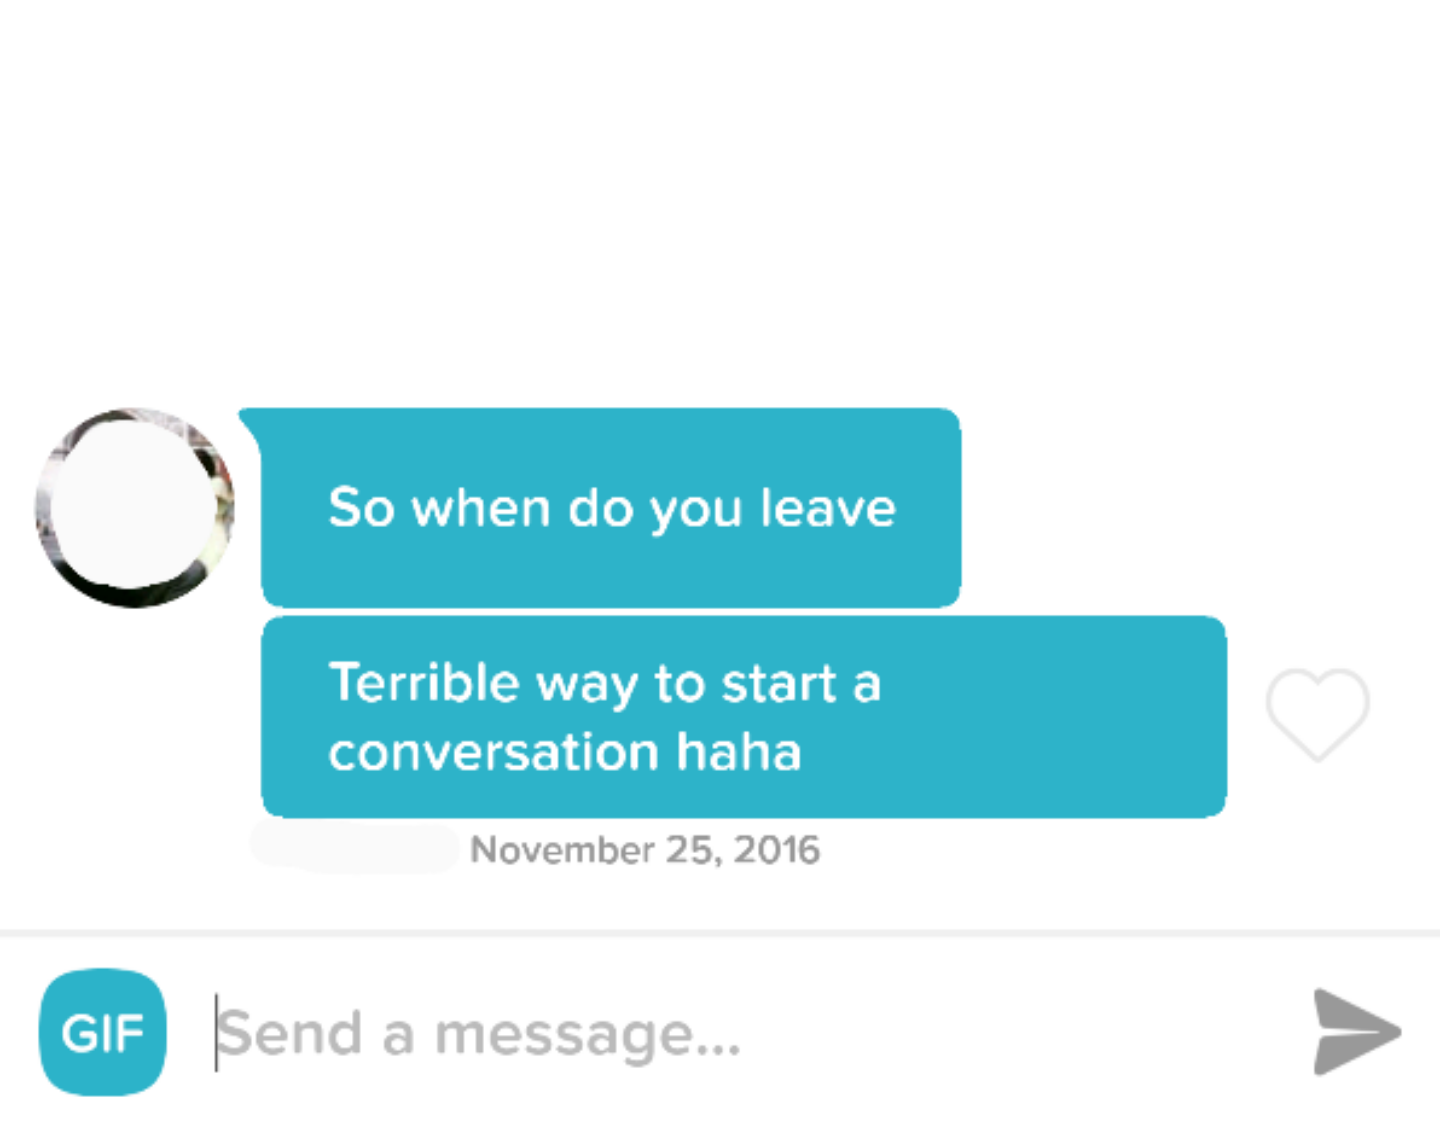 Is tinder conversation on good what to start a way Steps To